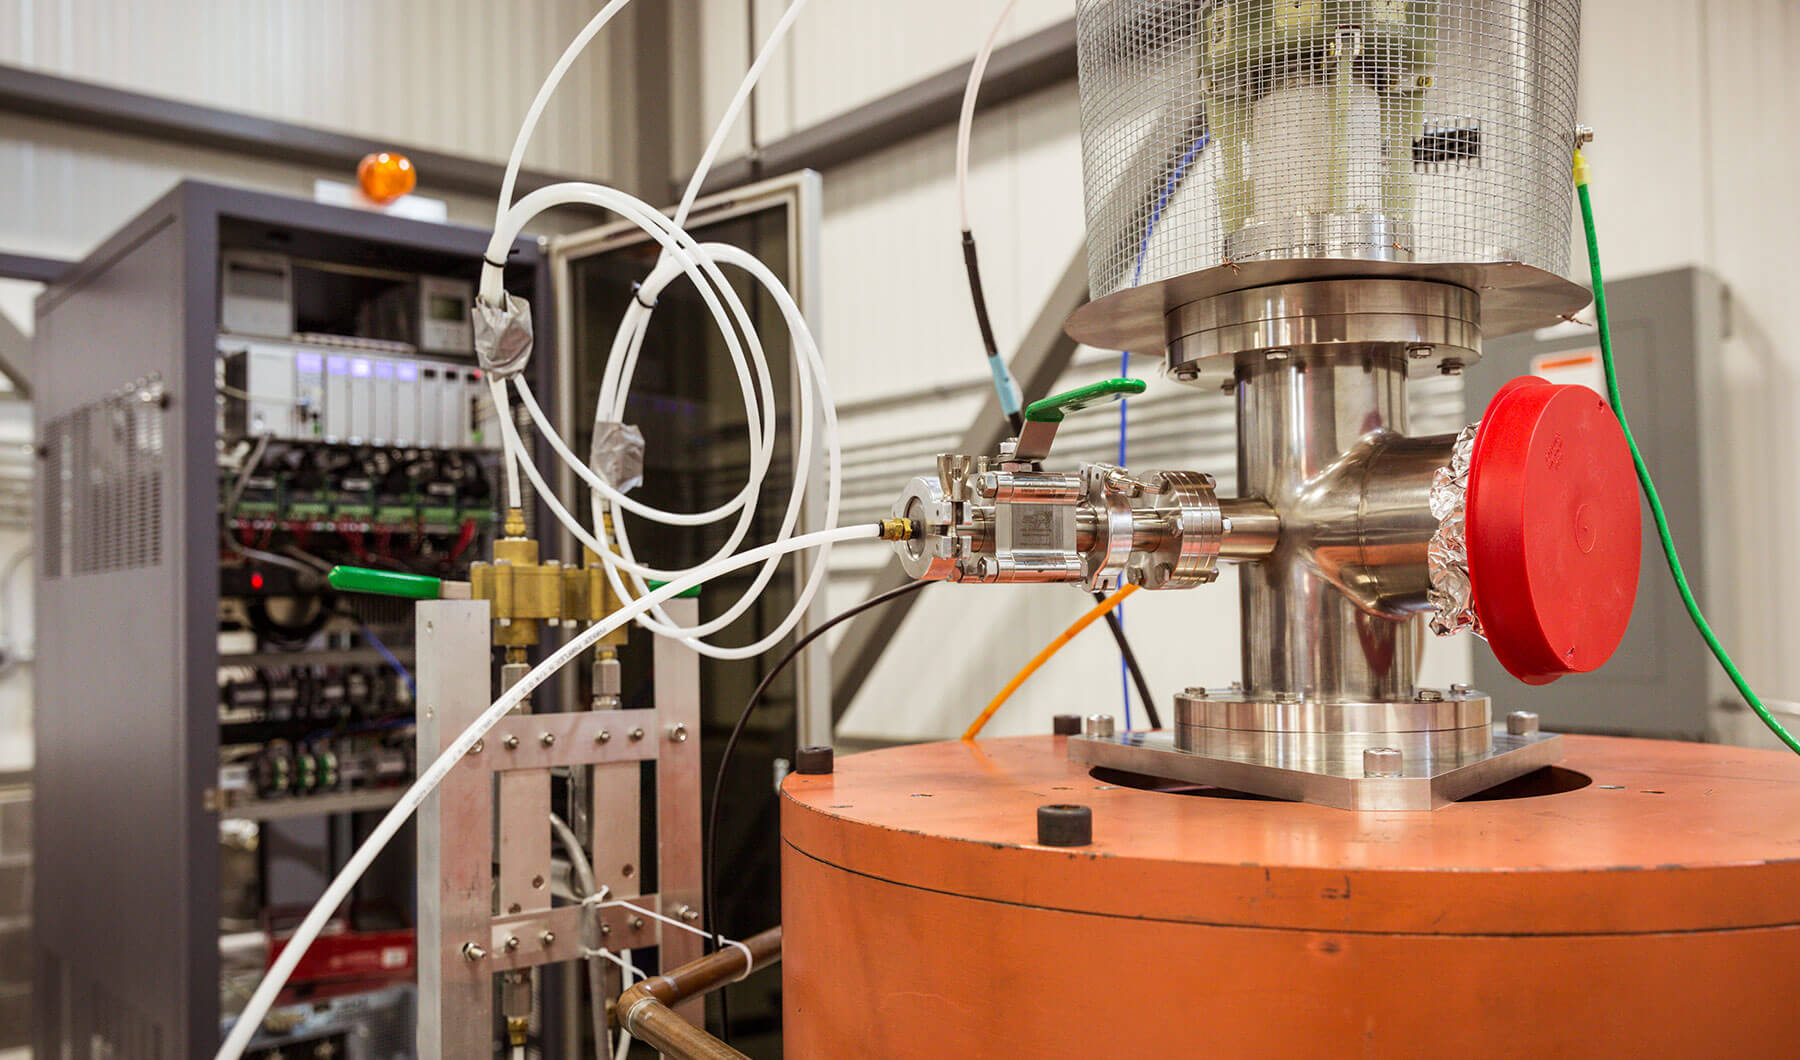 Antaya's prototype particle accelerator for proton beam therapy